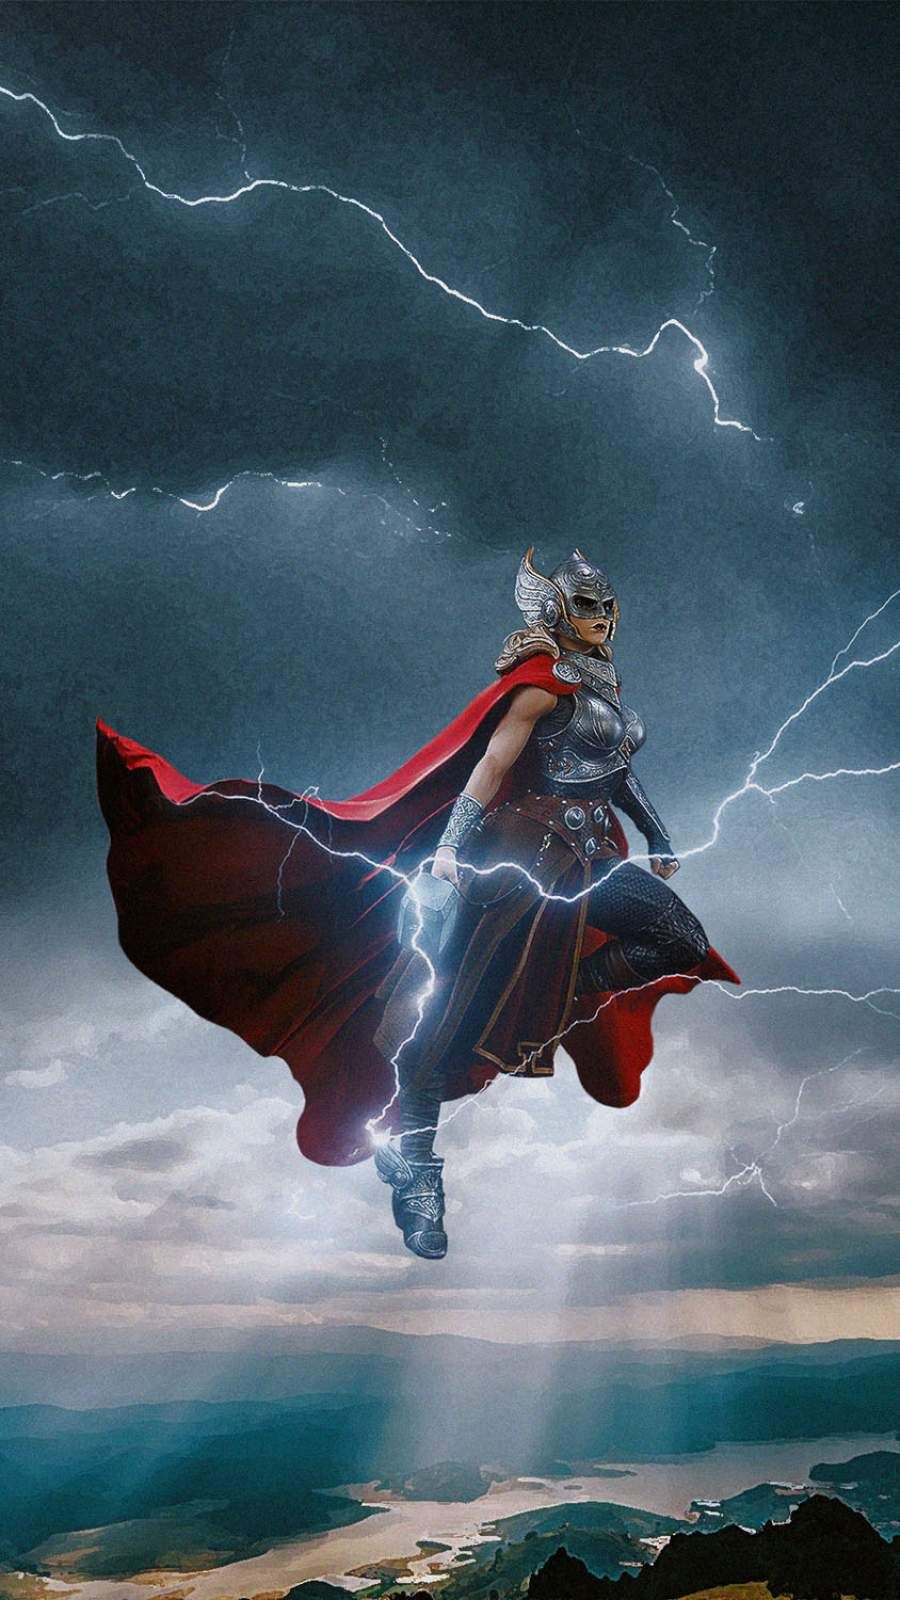 Thor From Endgame IPhone Wallpaper  IPhone Wallpapers  iPhone Wallpapers